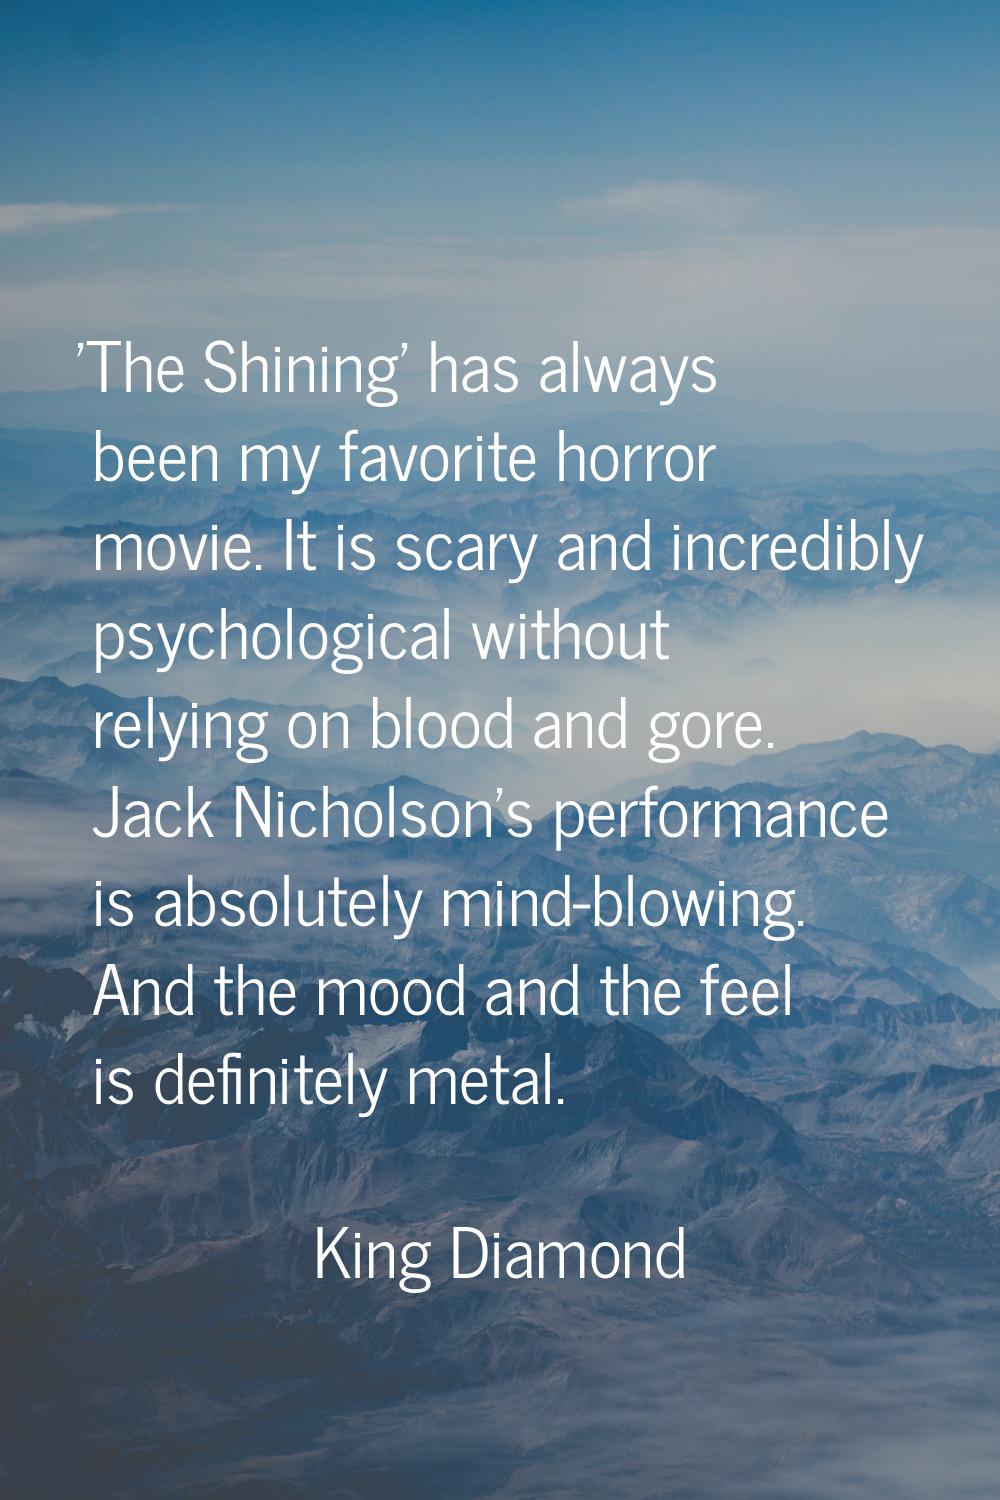 'The Shining' has always been my favorite horror movie. It is scary and incredibly psychological wi